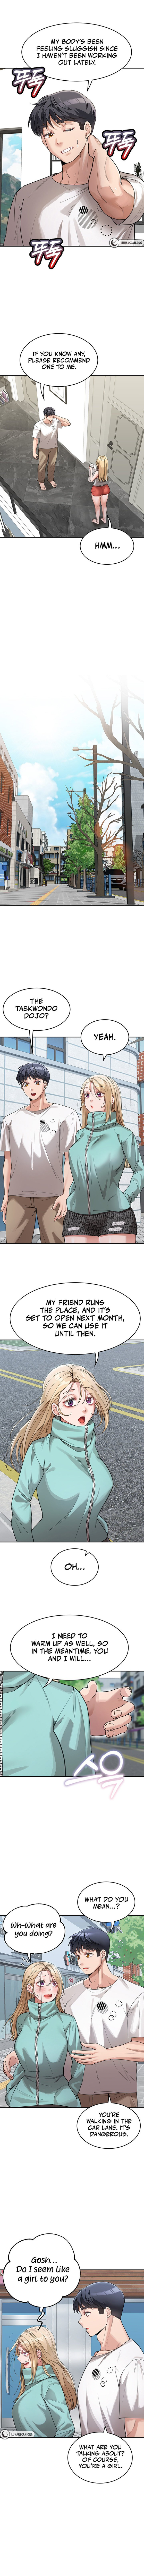 is-it-your-mother-or-sister-chap-30-4